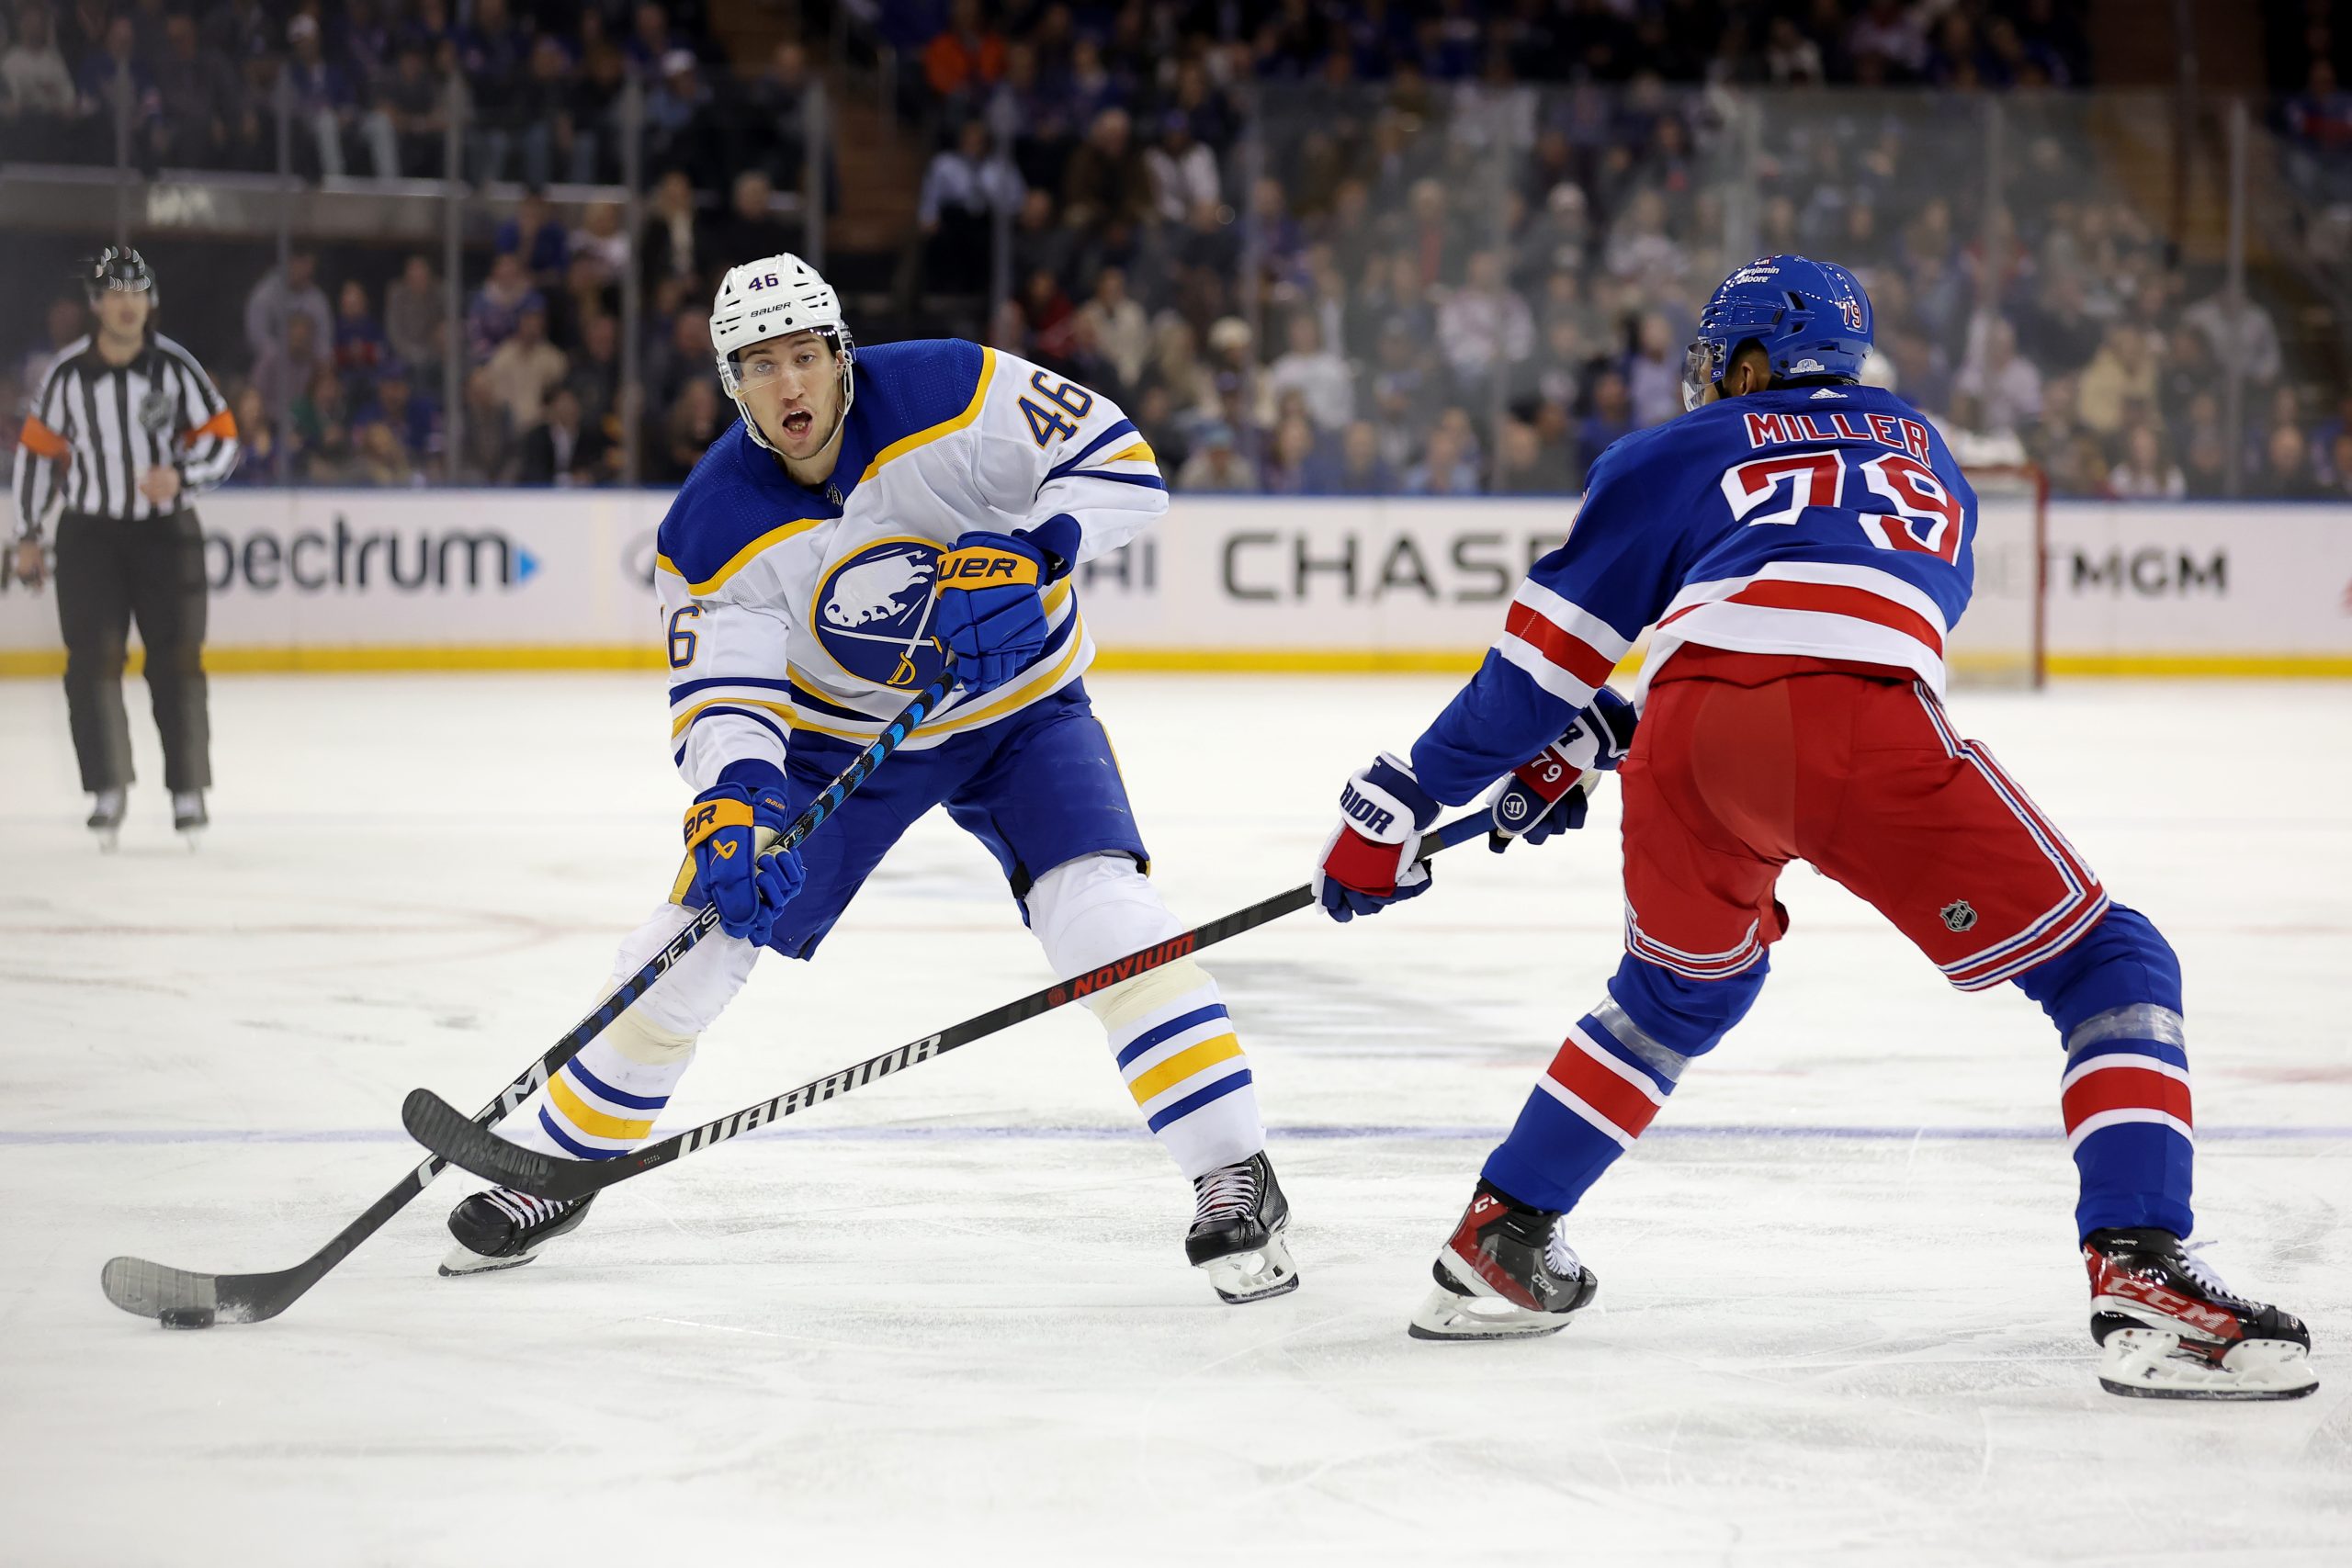 Rangers sign defenseman K'Andre Miller to two-year contract